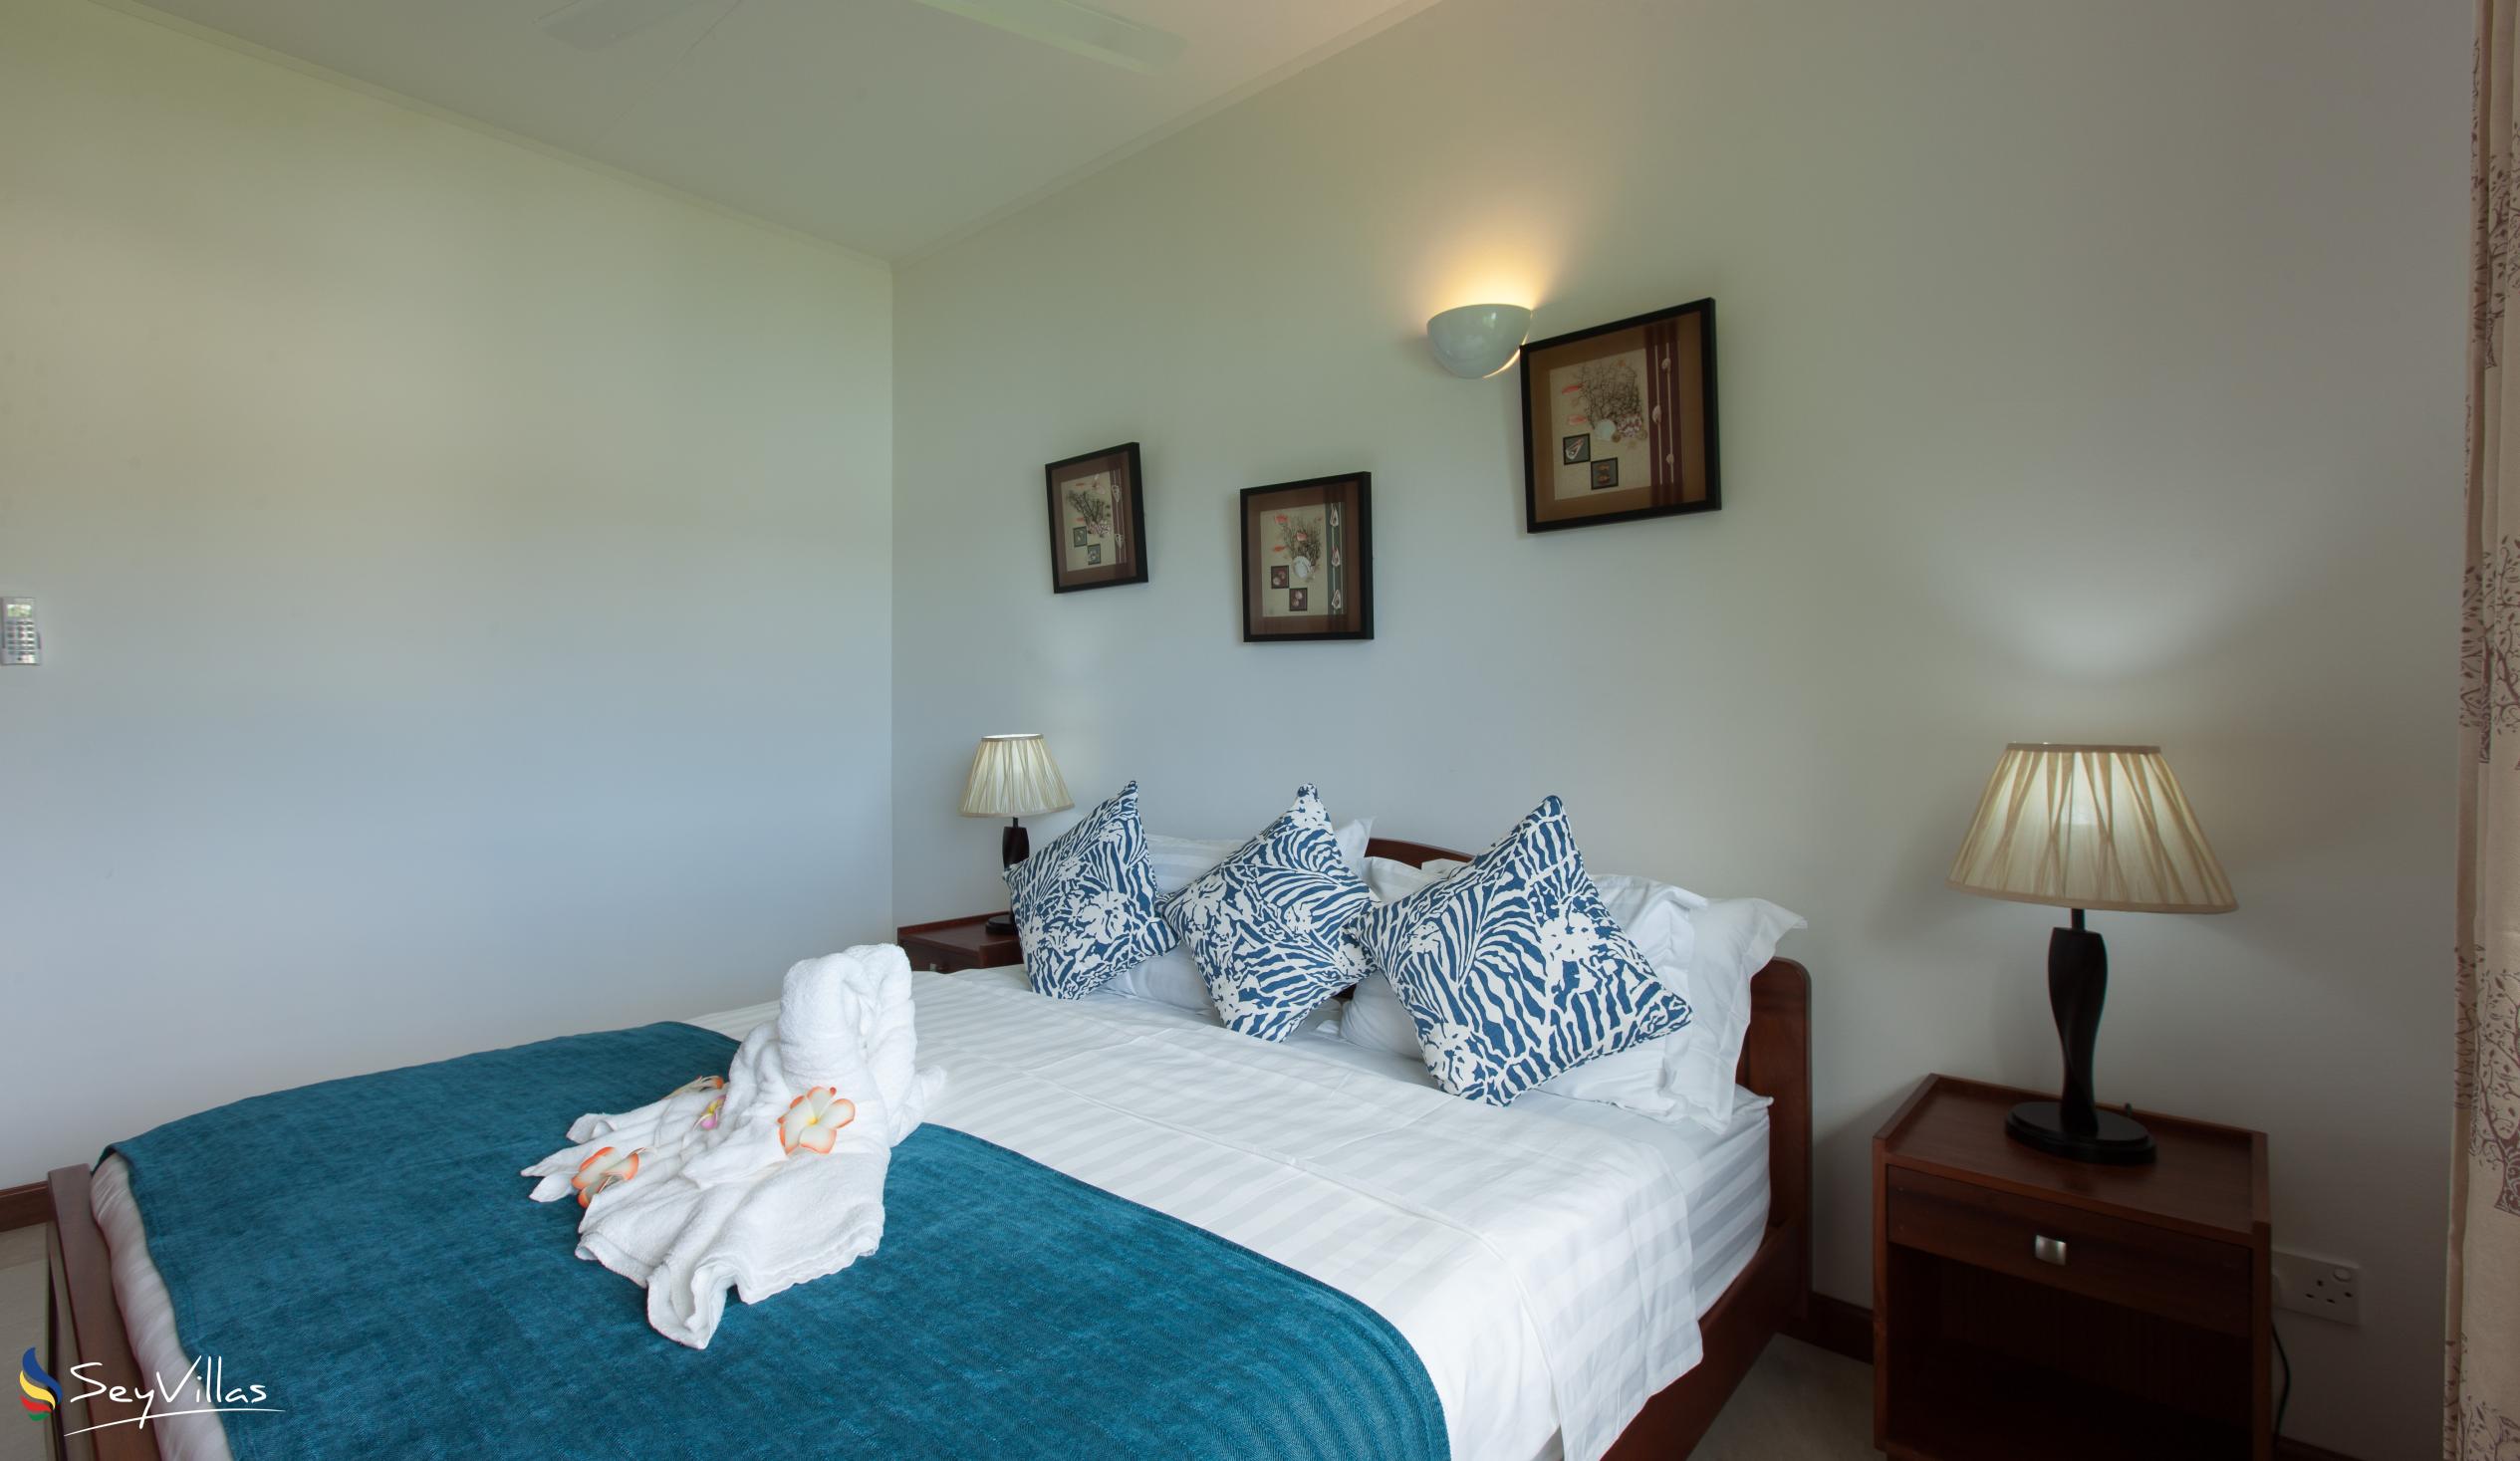 Photo 36: The Old School Self Catering - One-Bedroom Apartment - Praslin (Seychelles)